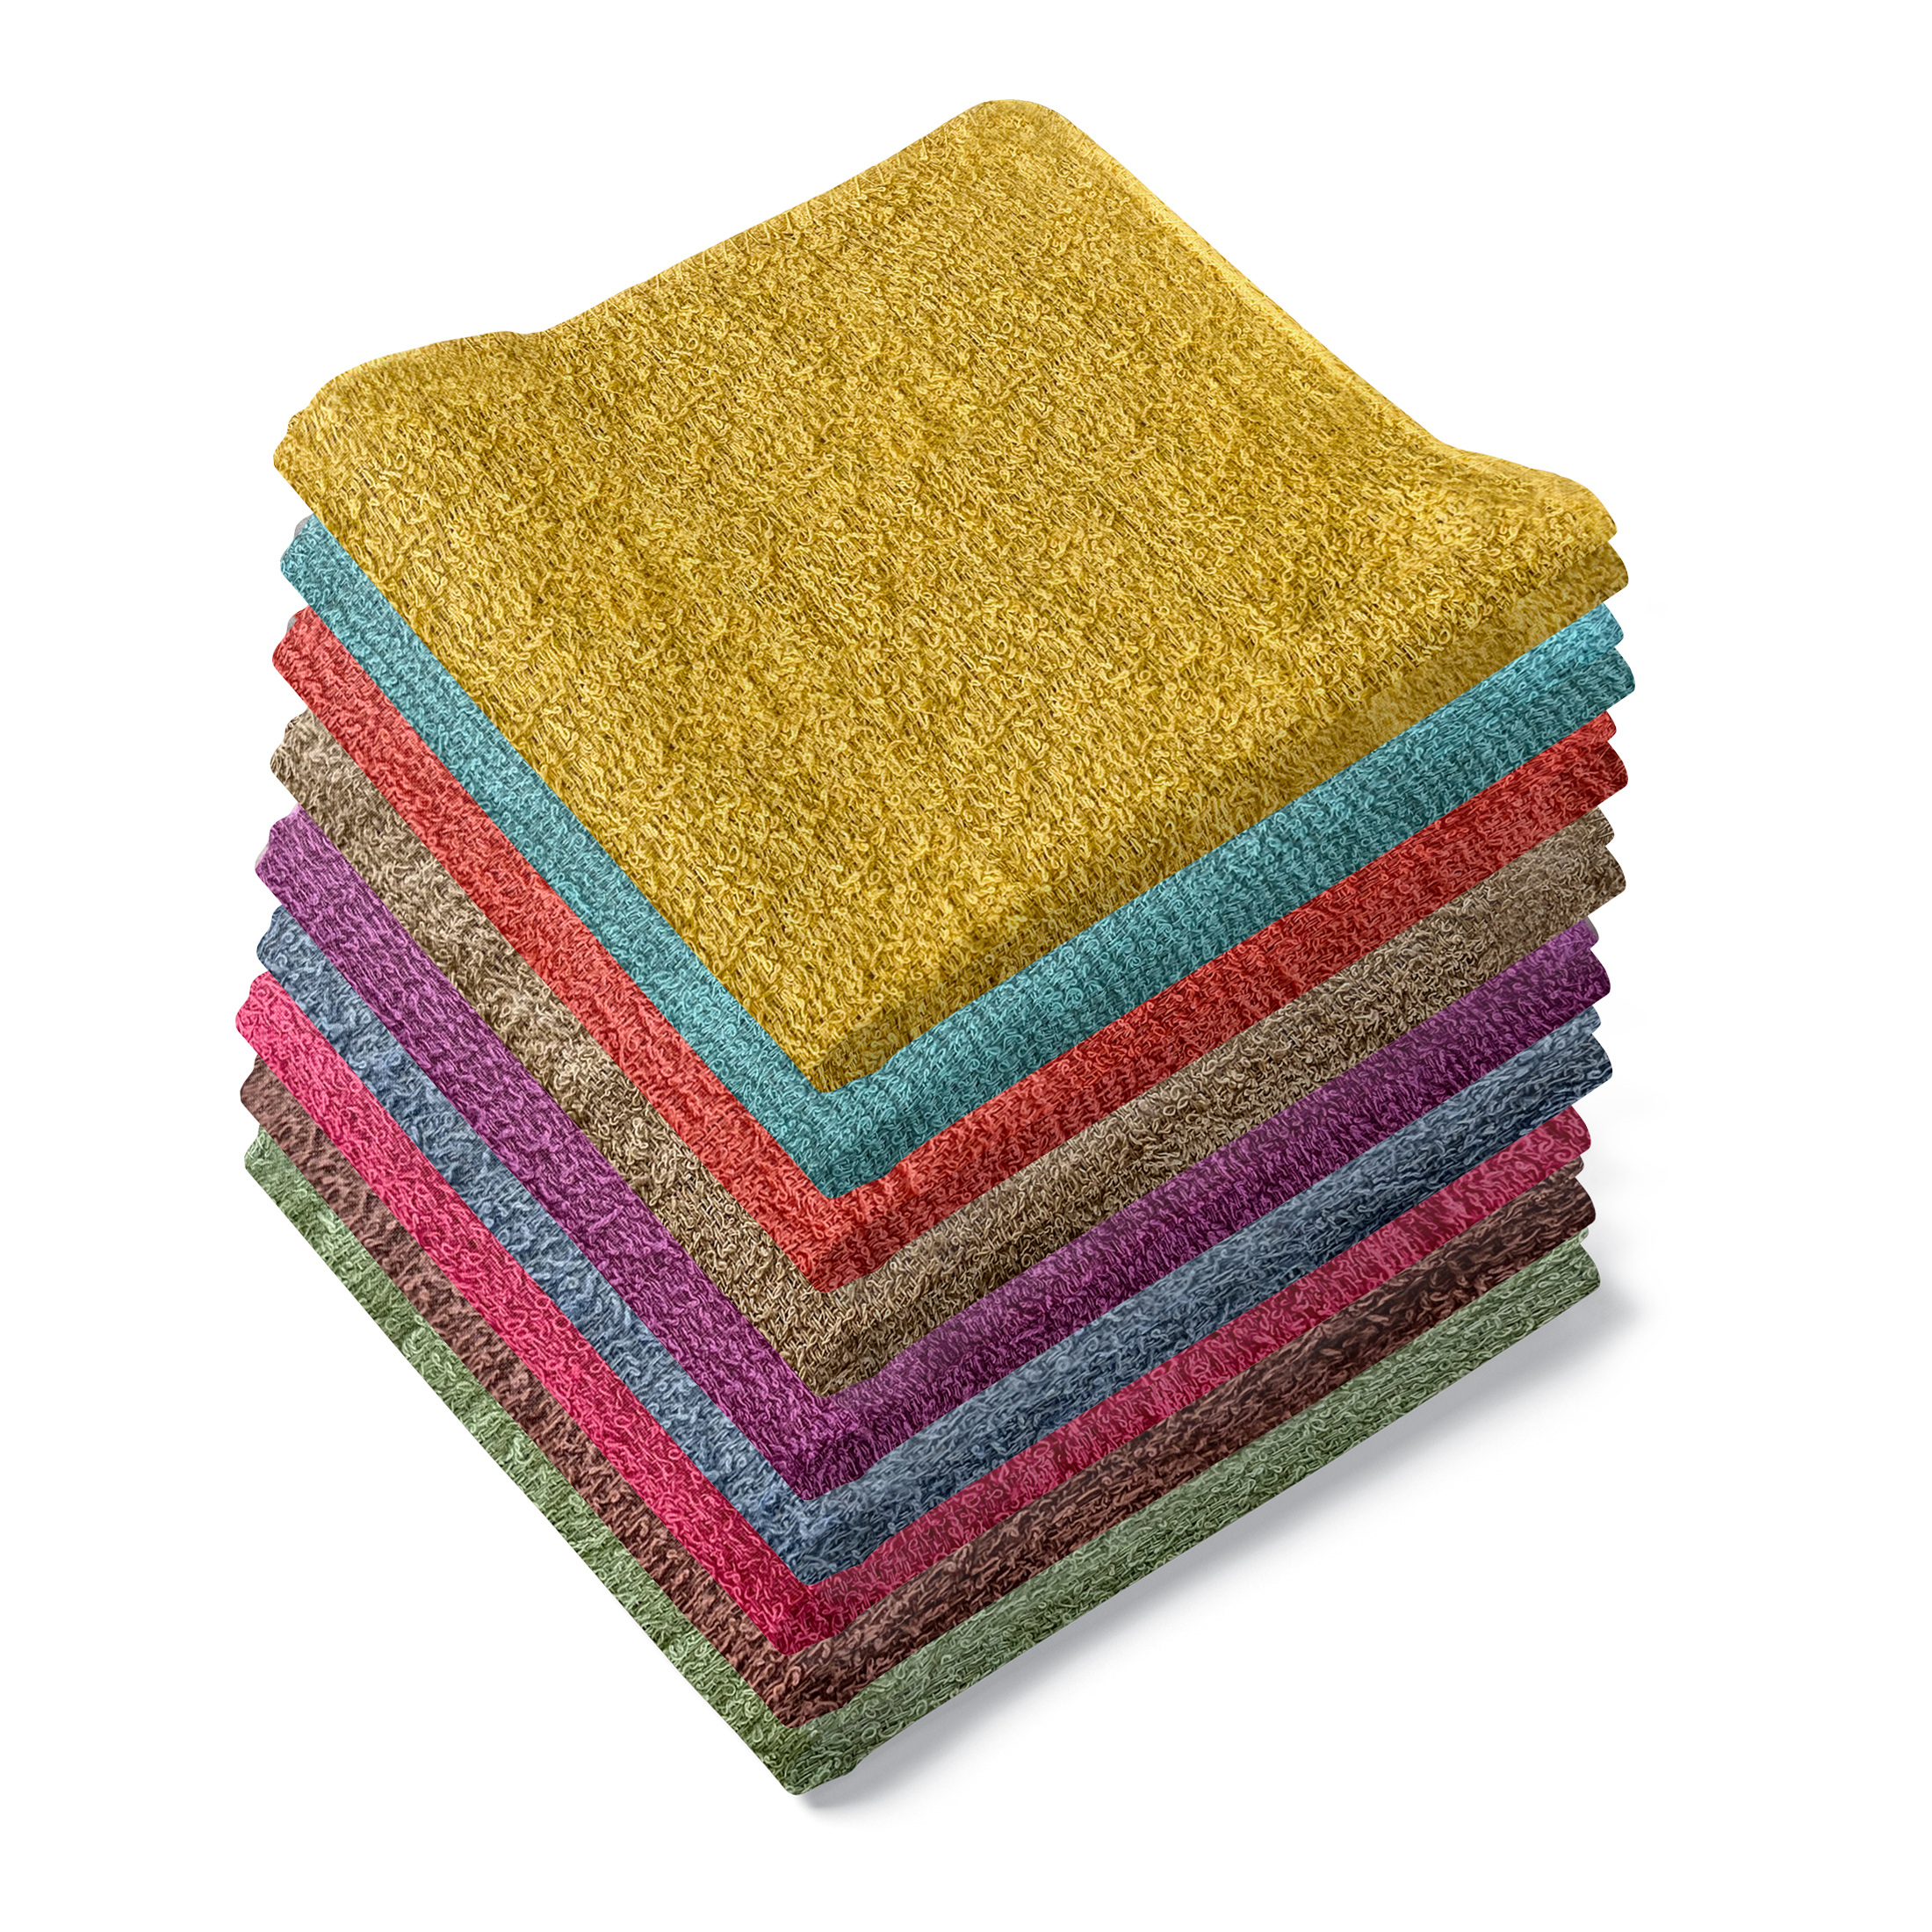 Multi-Pack: Absorbent 100% Cotton Kitchen Cleaning Dish Cloths 12x12 Face Wash Cloth - 12-PK